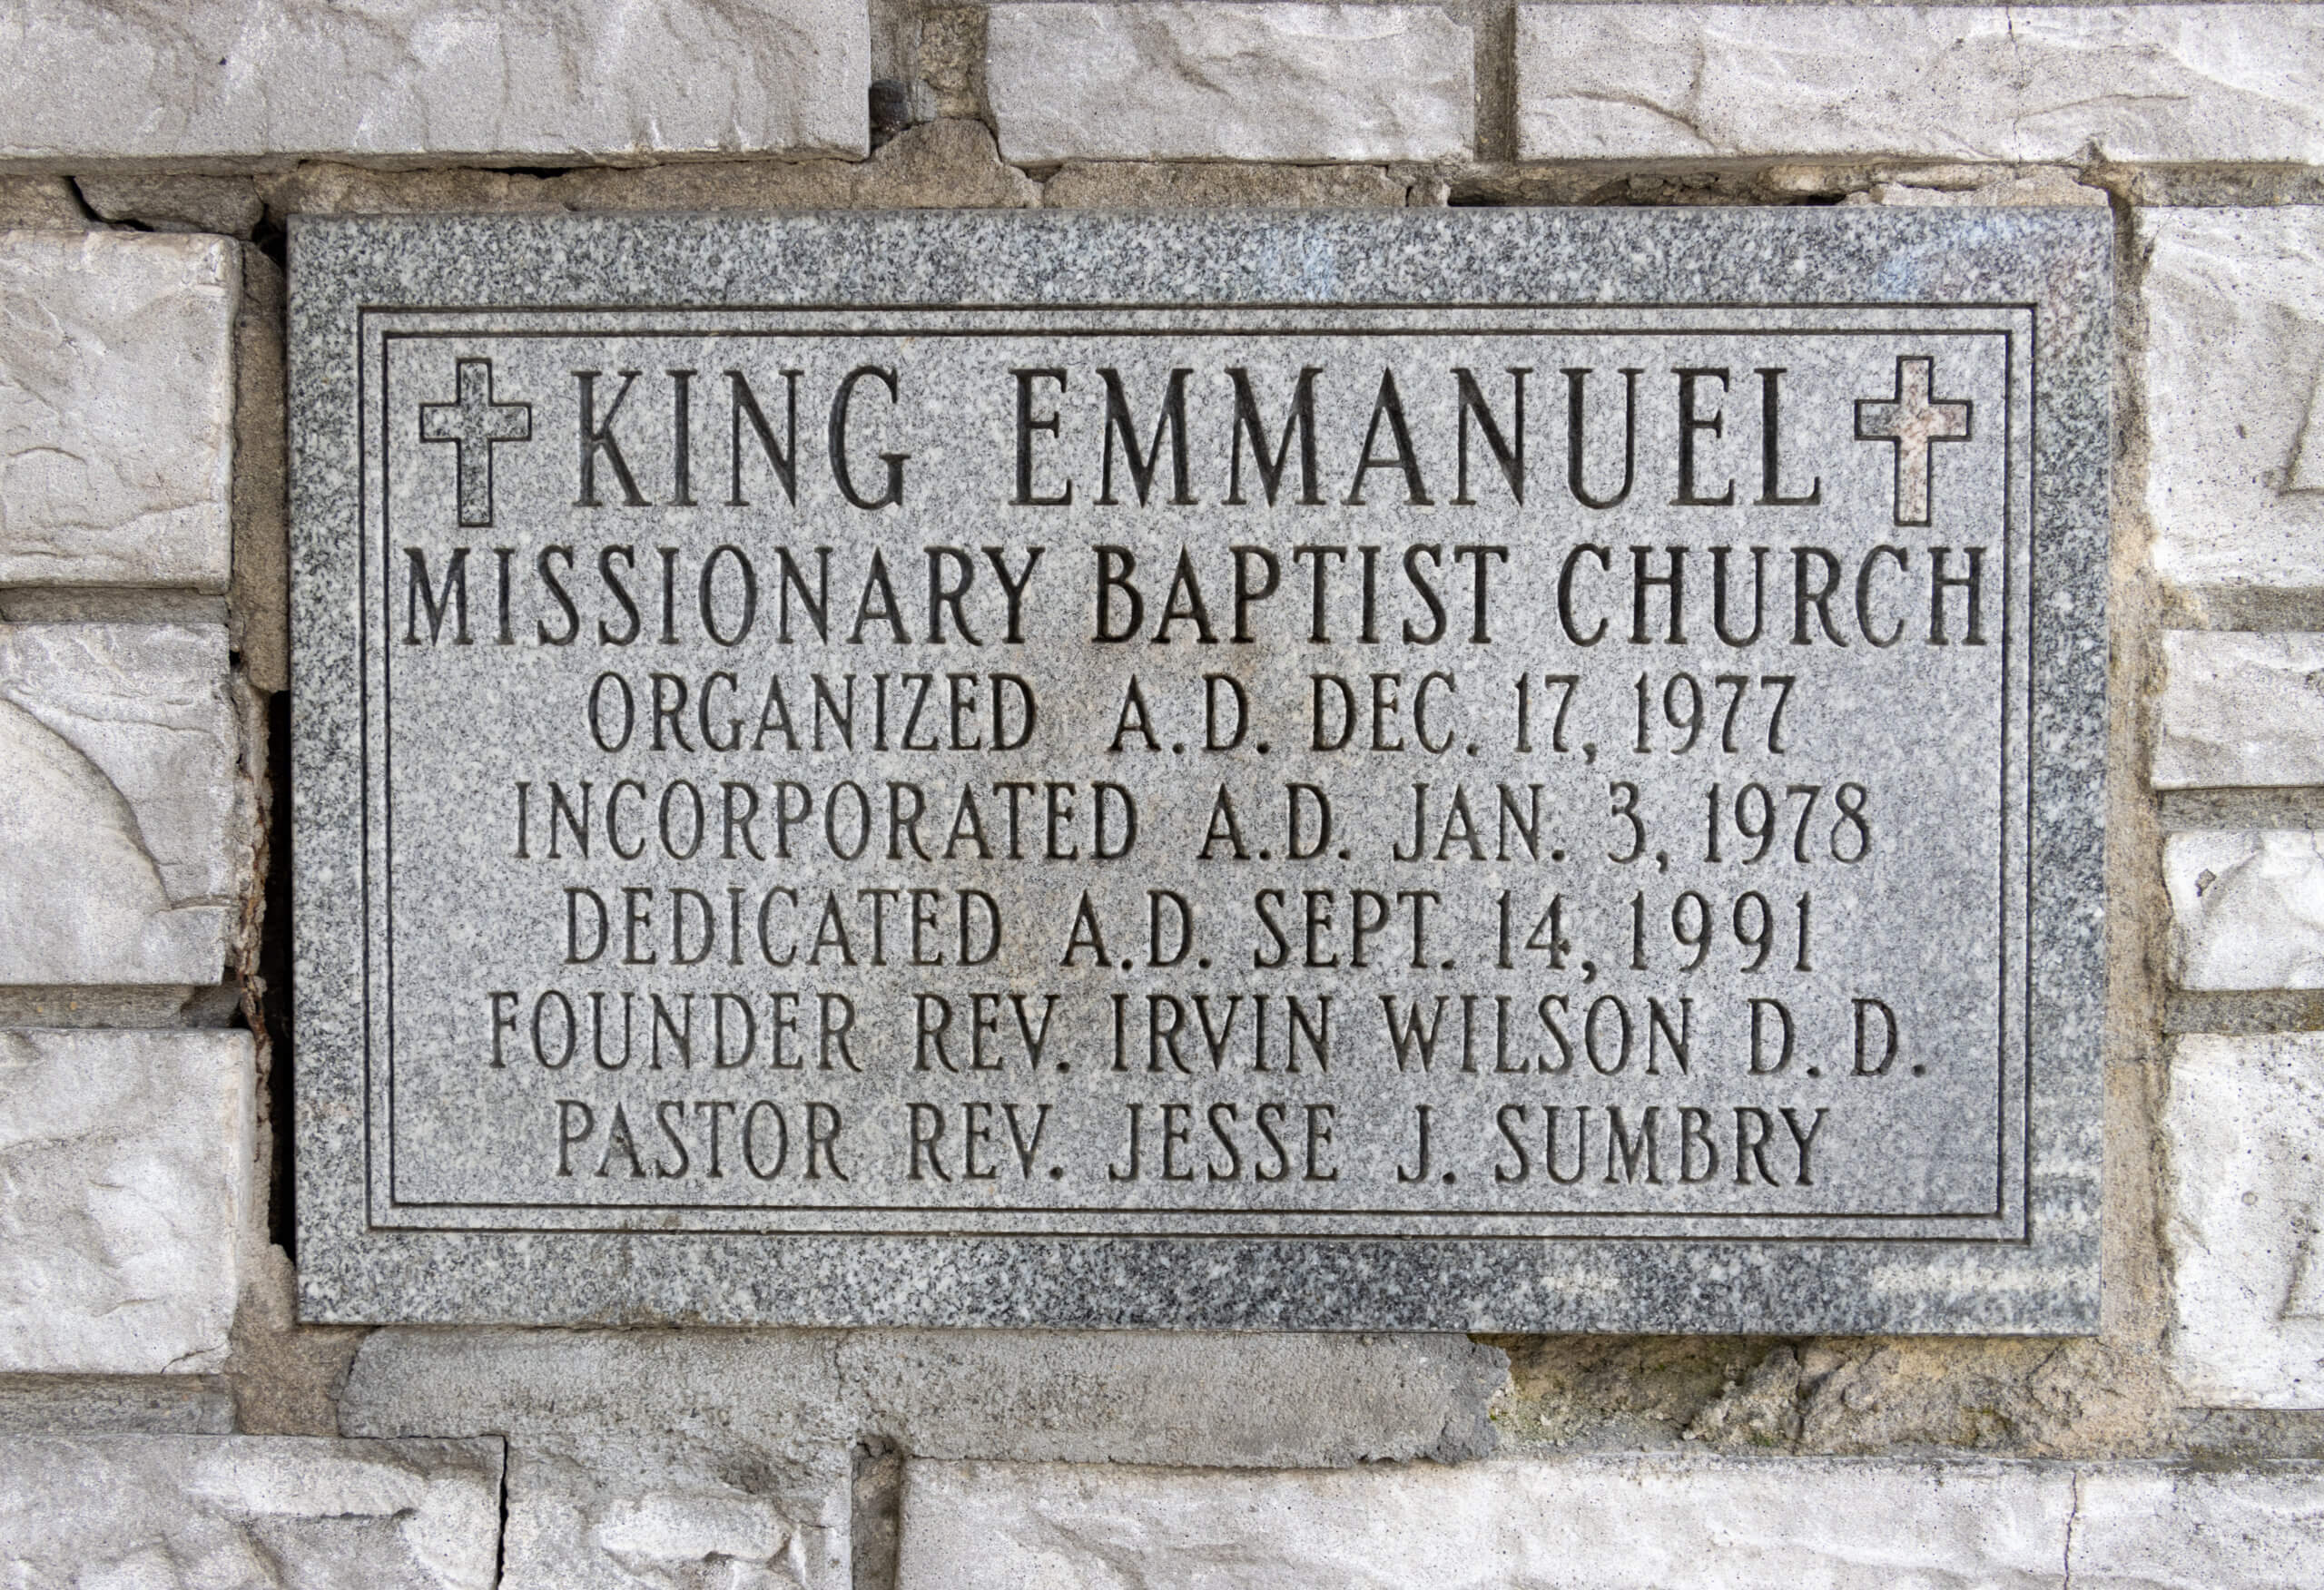 cornerstone noting the dedication date for the king emmanuel missionary baptist church in 1991